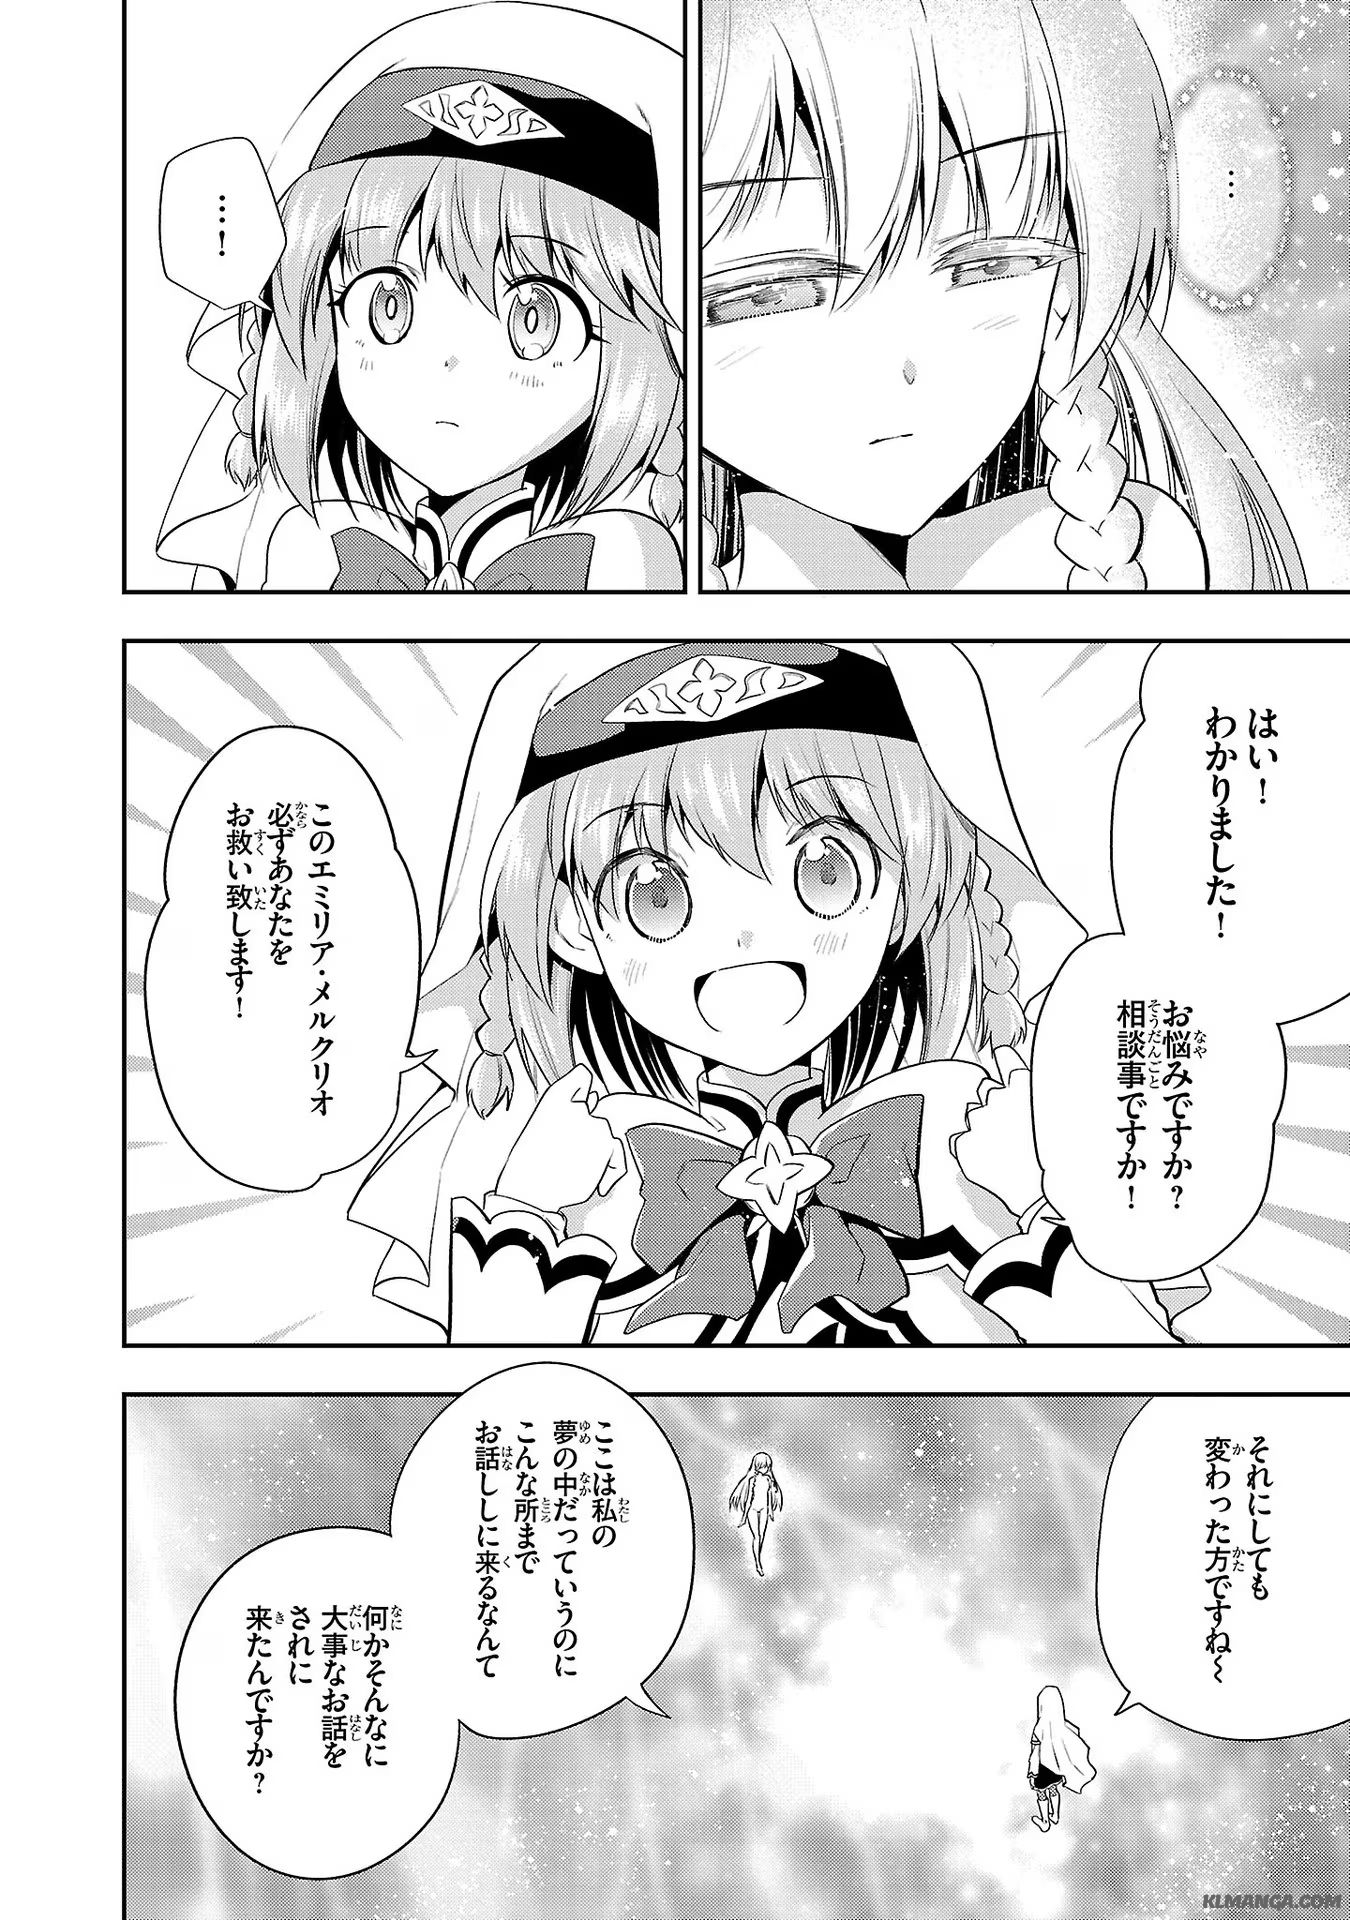 Hungry Saint and Full-Stomach Witch’s Slow Life in Another World! 腹ペコ聖女とまんぷく魔女の異世界スローライフ! 第12話 - Page 2